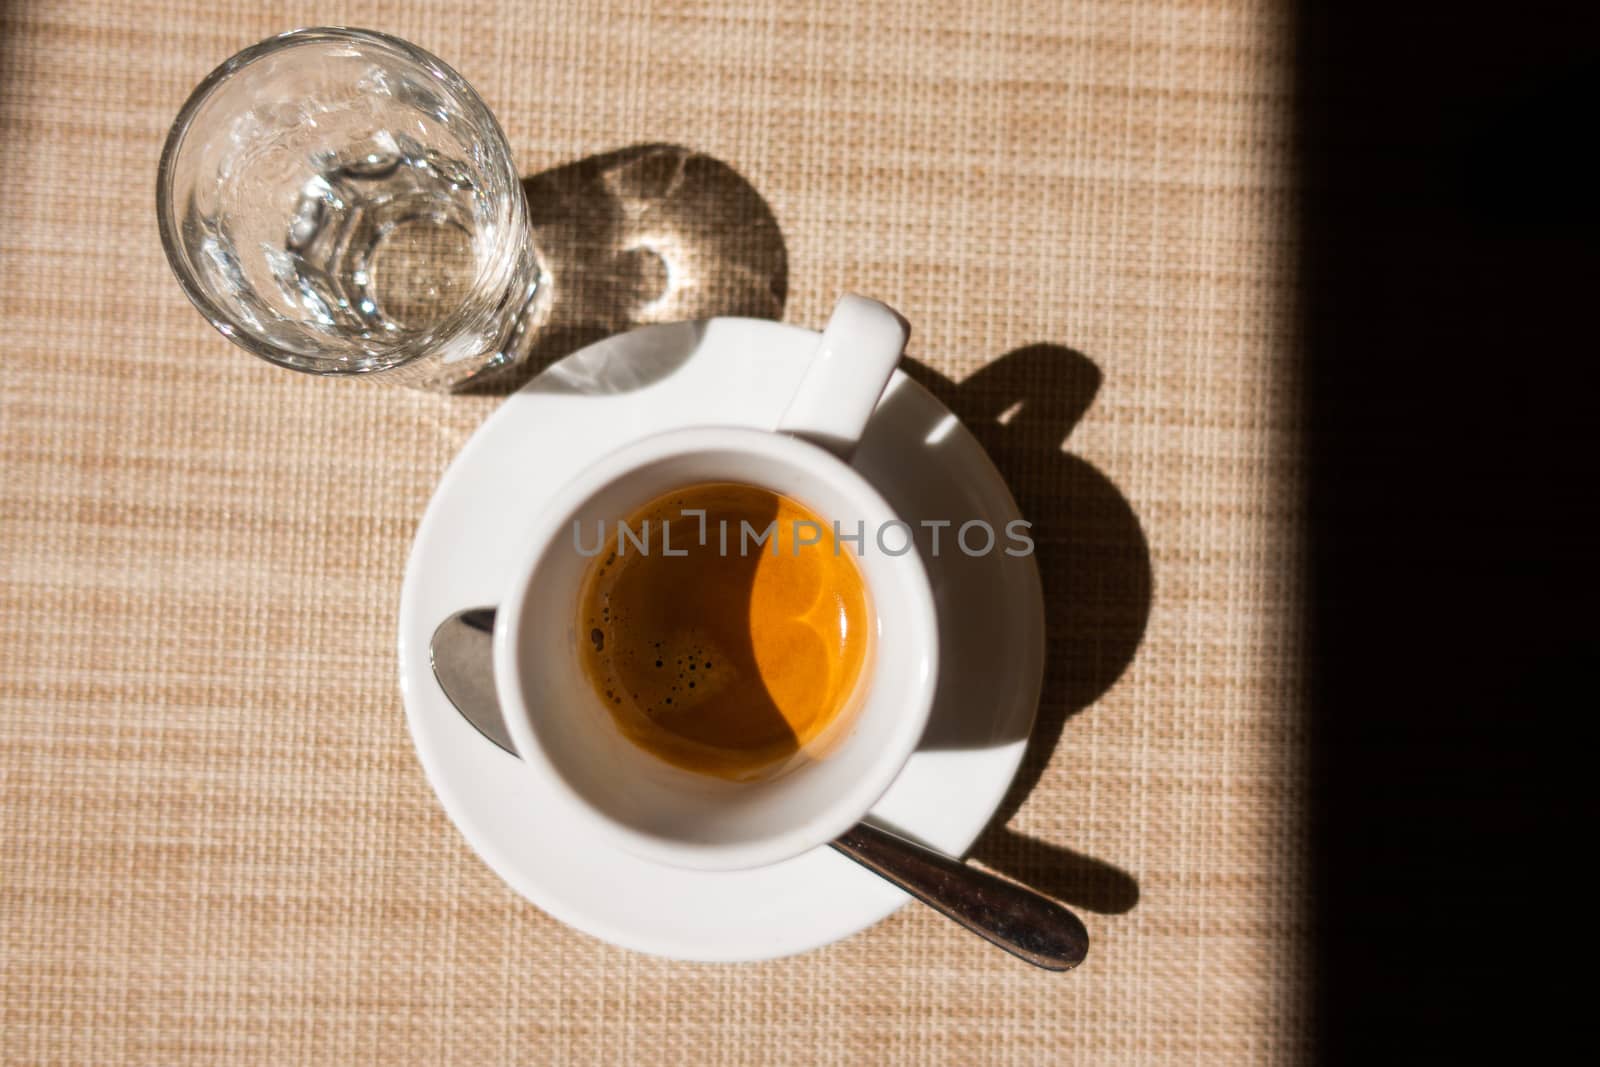 Caffe corretto, traditional Italian beverage with espresso and a shot of liquor, usually grappa by asafaric